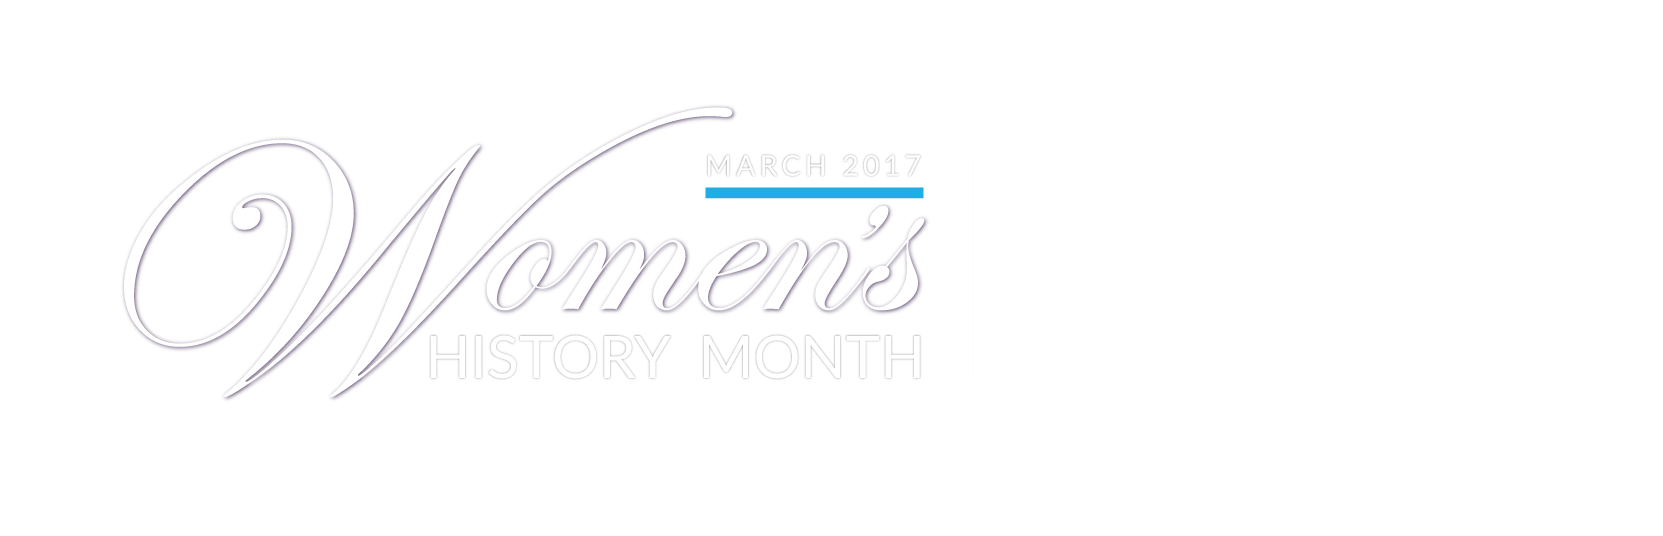 Women's History Month - March 2017